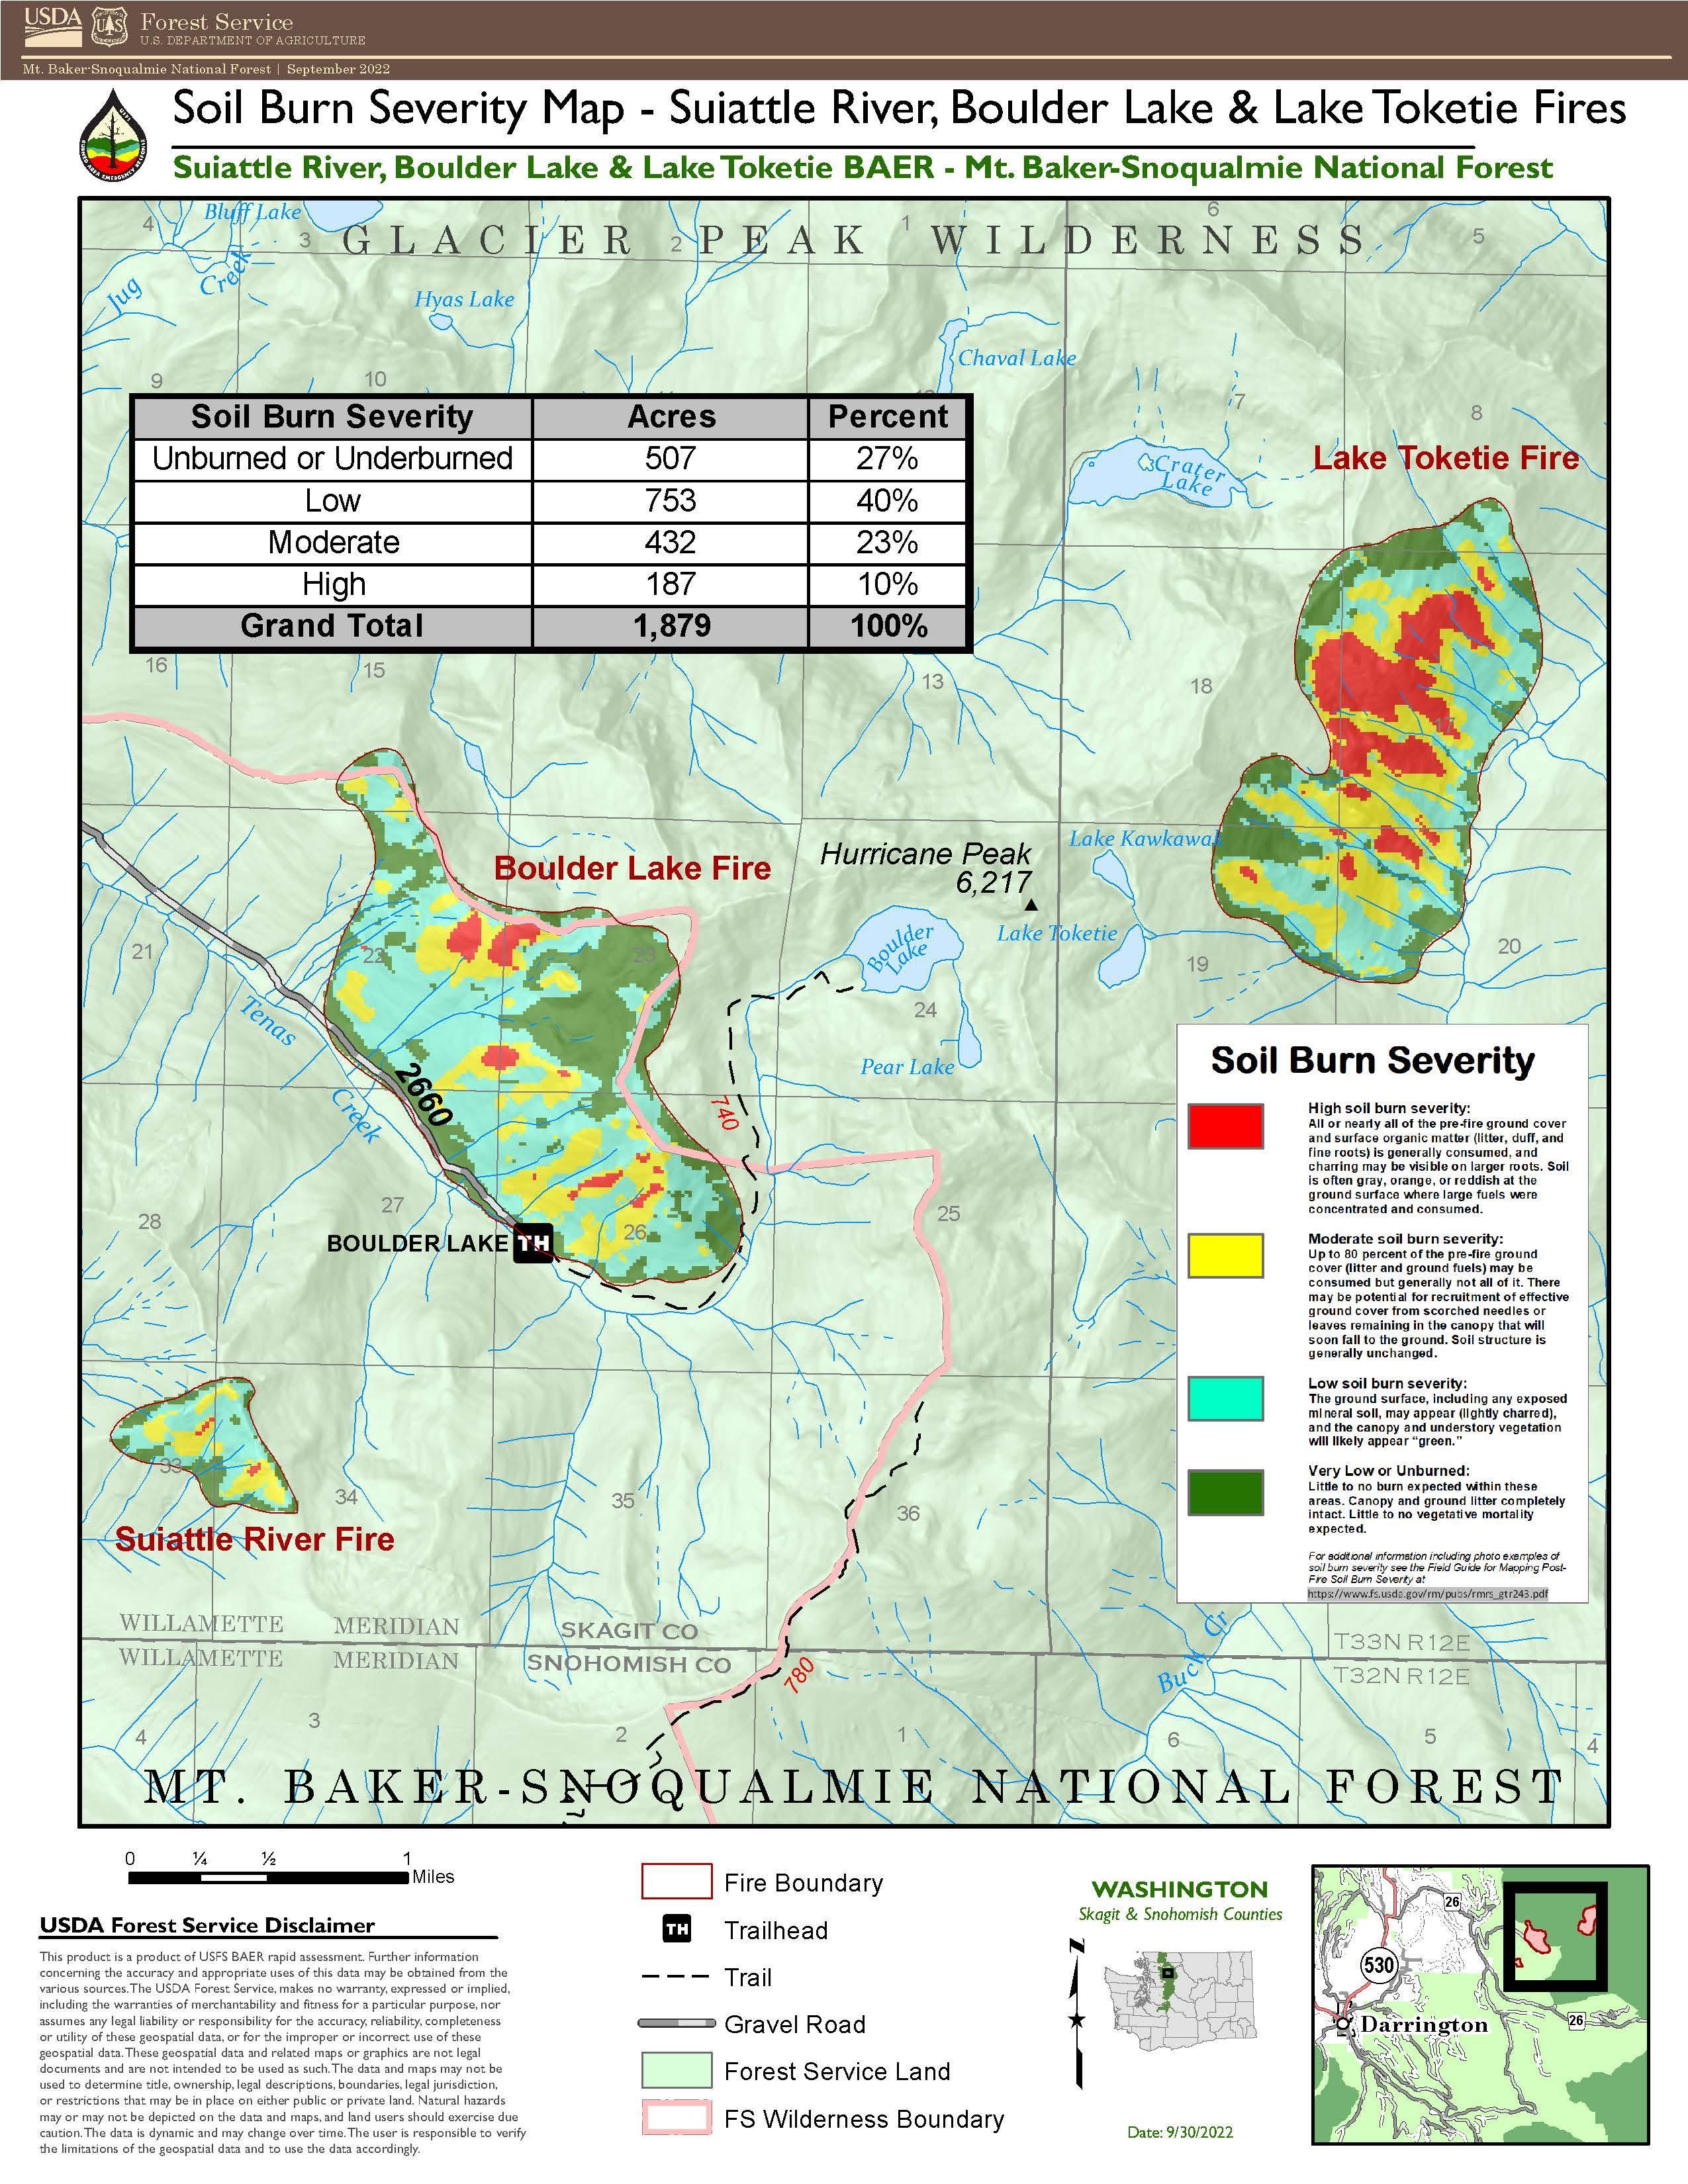 Soil burn severity map for Suiattle River Fire, Lake Tokeitie Fire and Boulder Lake Fire